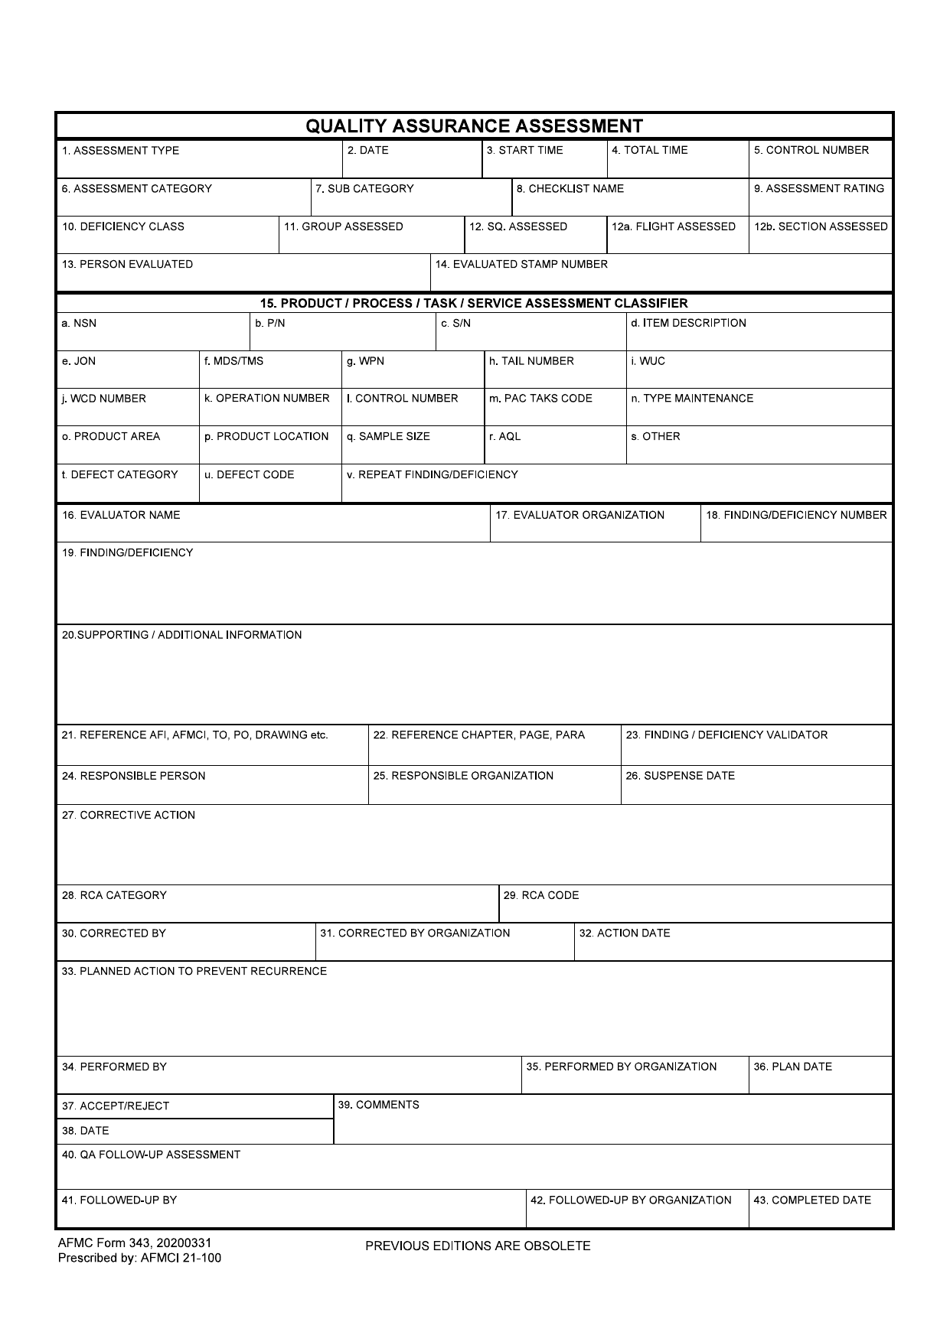 AFMC Form 343 Quality Assurance Assessment, Page 1